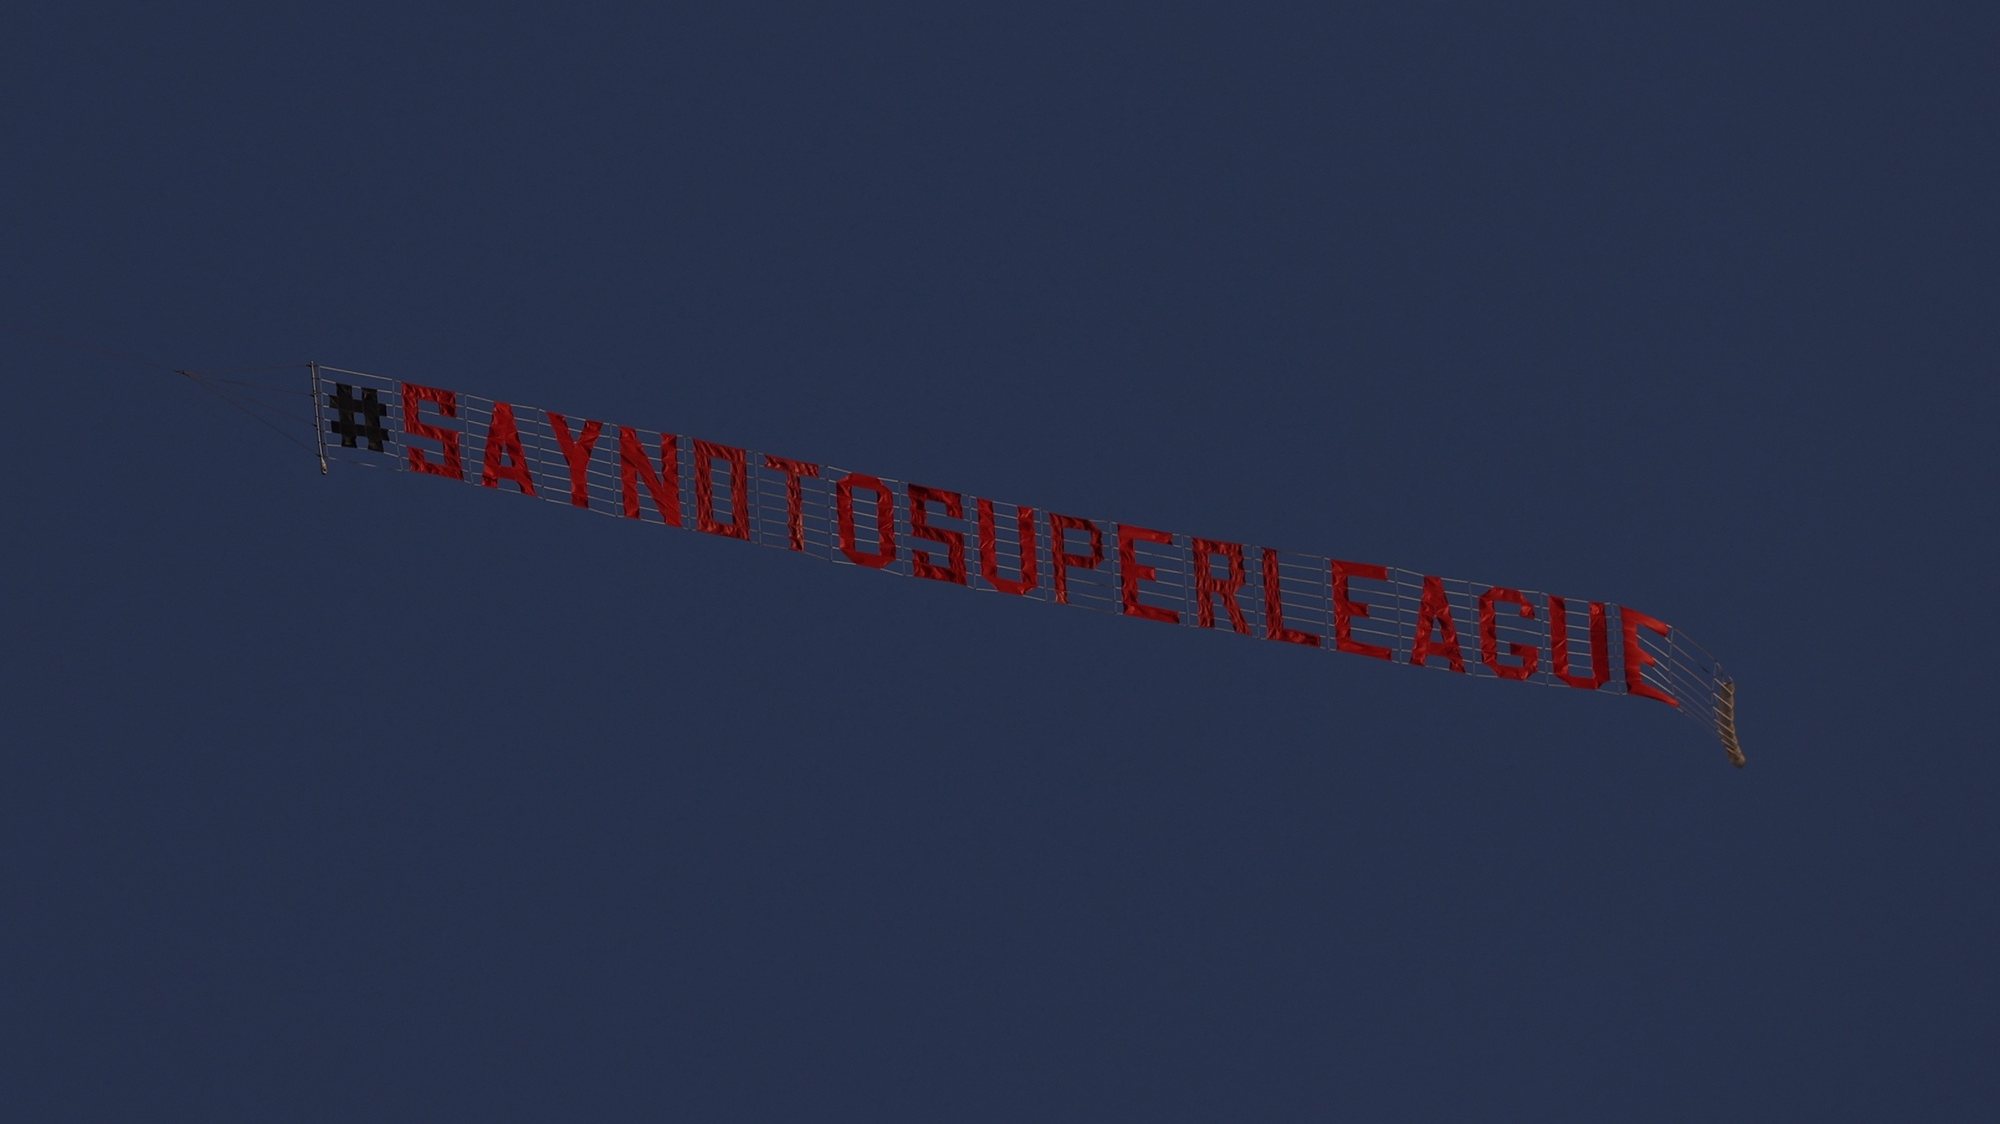 epa09146084 A flying banner written &#039;SAY NO TO SUPER LEAGUE&#039; is seen over the Elland Road stadium ahead of the English Premier League soccer match between Leeds United and Liverpool FC in Leeds, Britain, 19 April 2021.  EPA/Clive Brunskill / POOL EDITORIAL USE ONLY. No use with unauthorized audio, video, data, fixture lists, club/league logos or &#039;live&#039; services. Online in-match use limited to 120 images, no video emulation. No use in betting, games or single club/league/player publications.